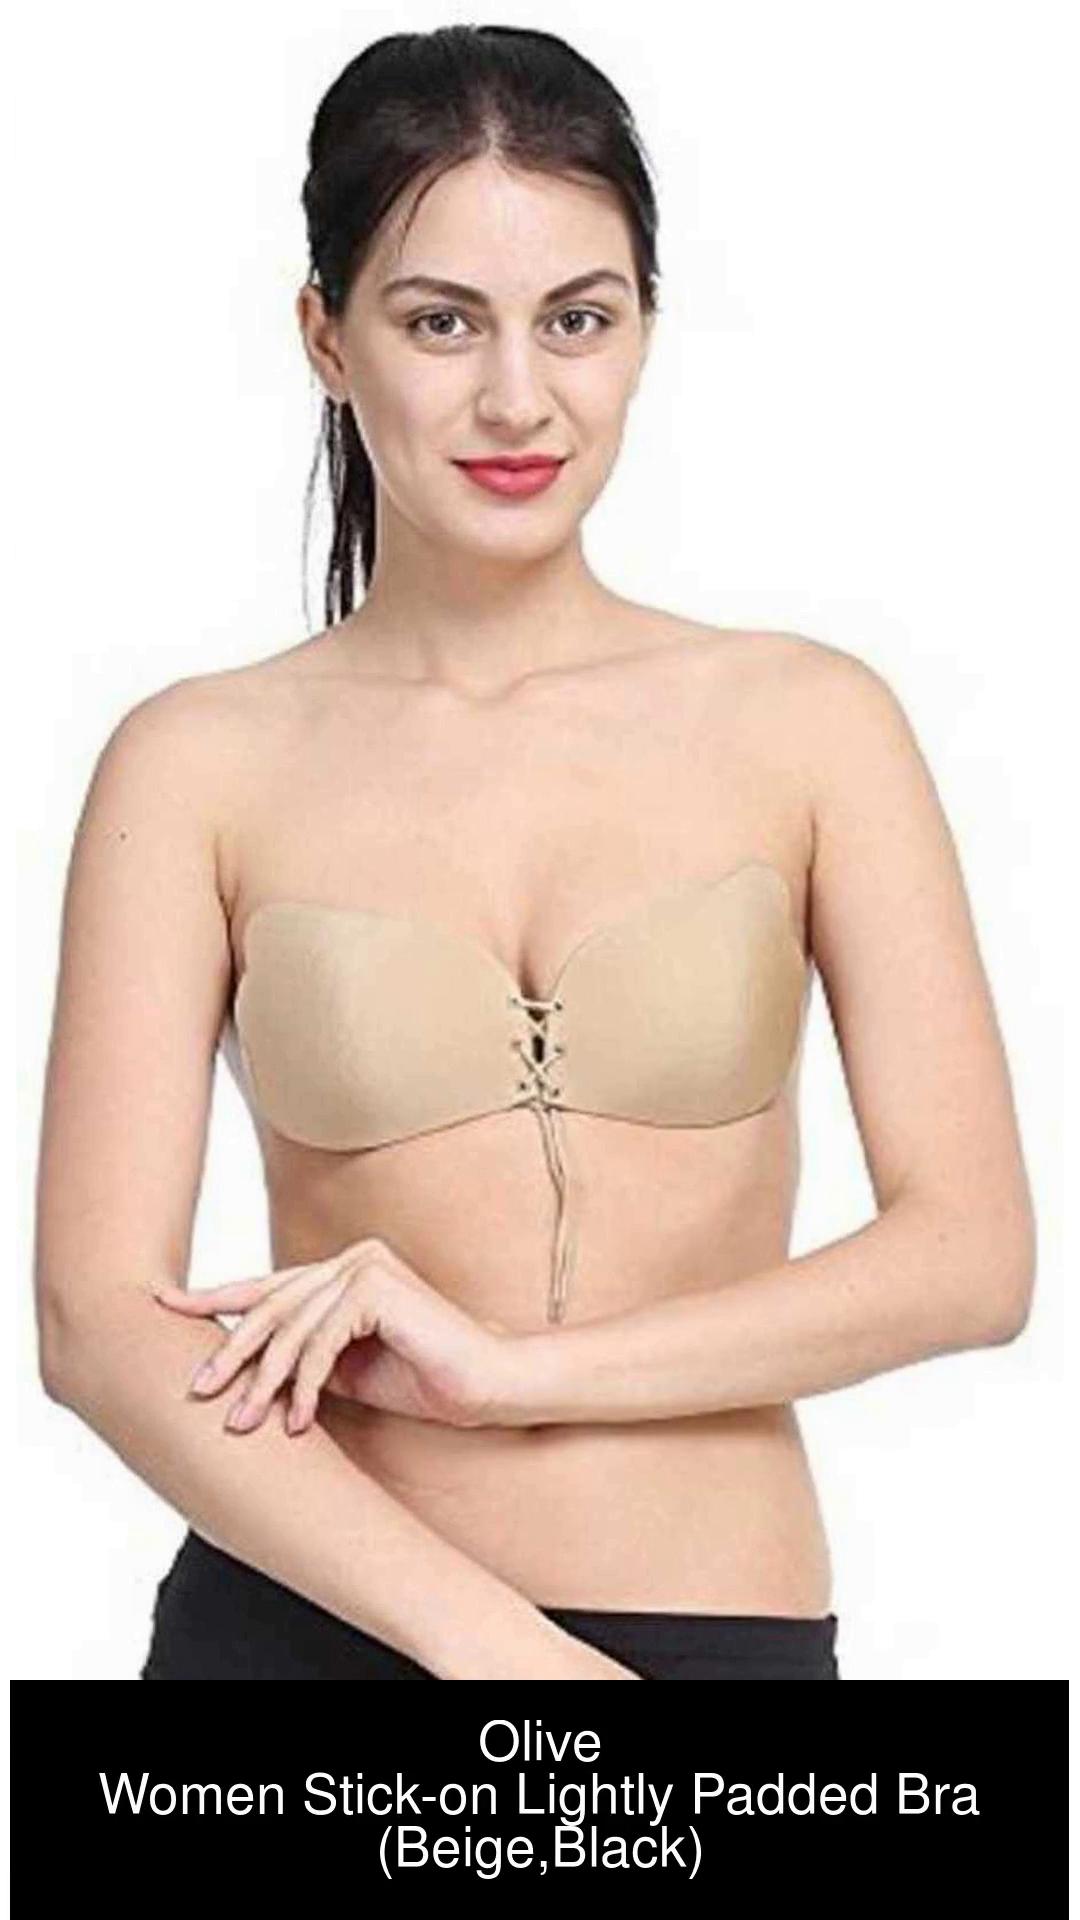 Olive Women's Pull-Up Adhesive Bra Women Stick-on Lightly Padded Bra - Buy  Olive Women's Pull-Up Adhesive Bra Women Stick-on Lightly Padded Bra Online  at Best Prices in India